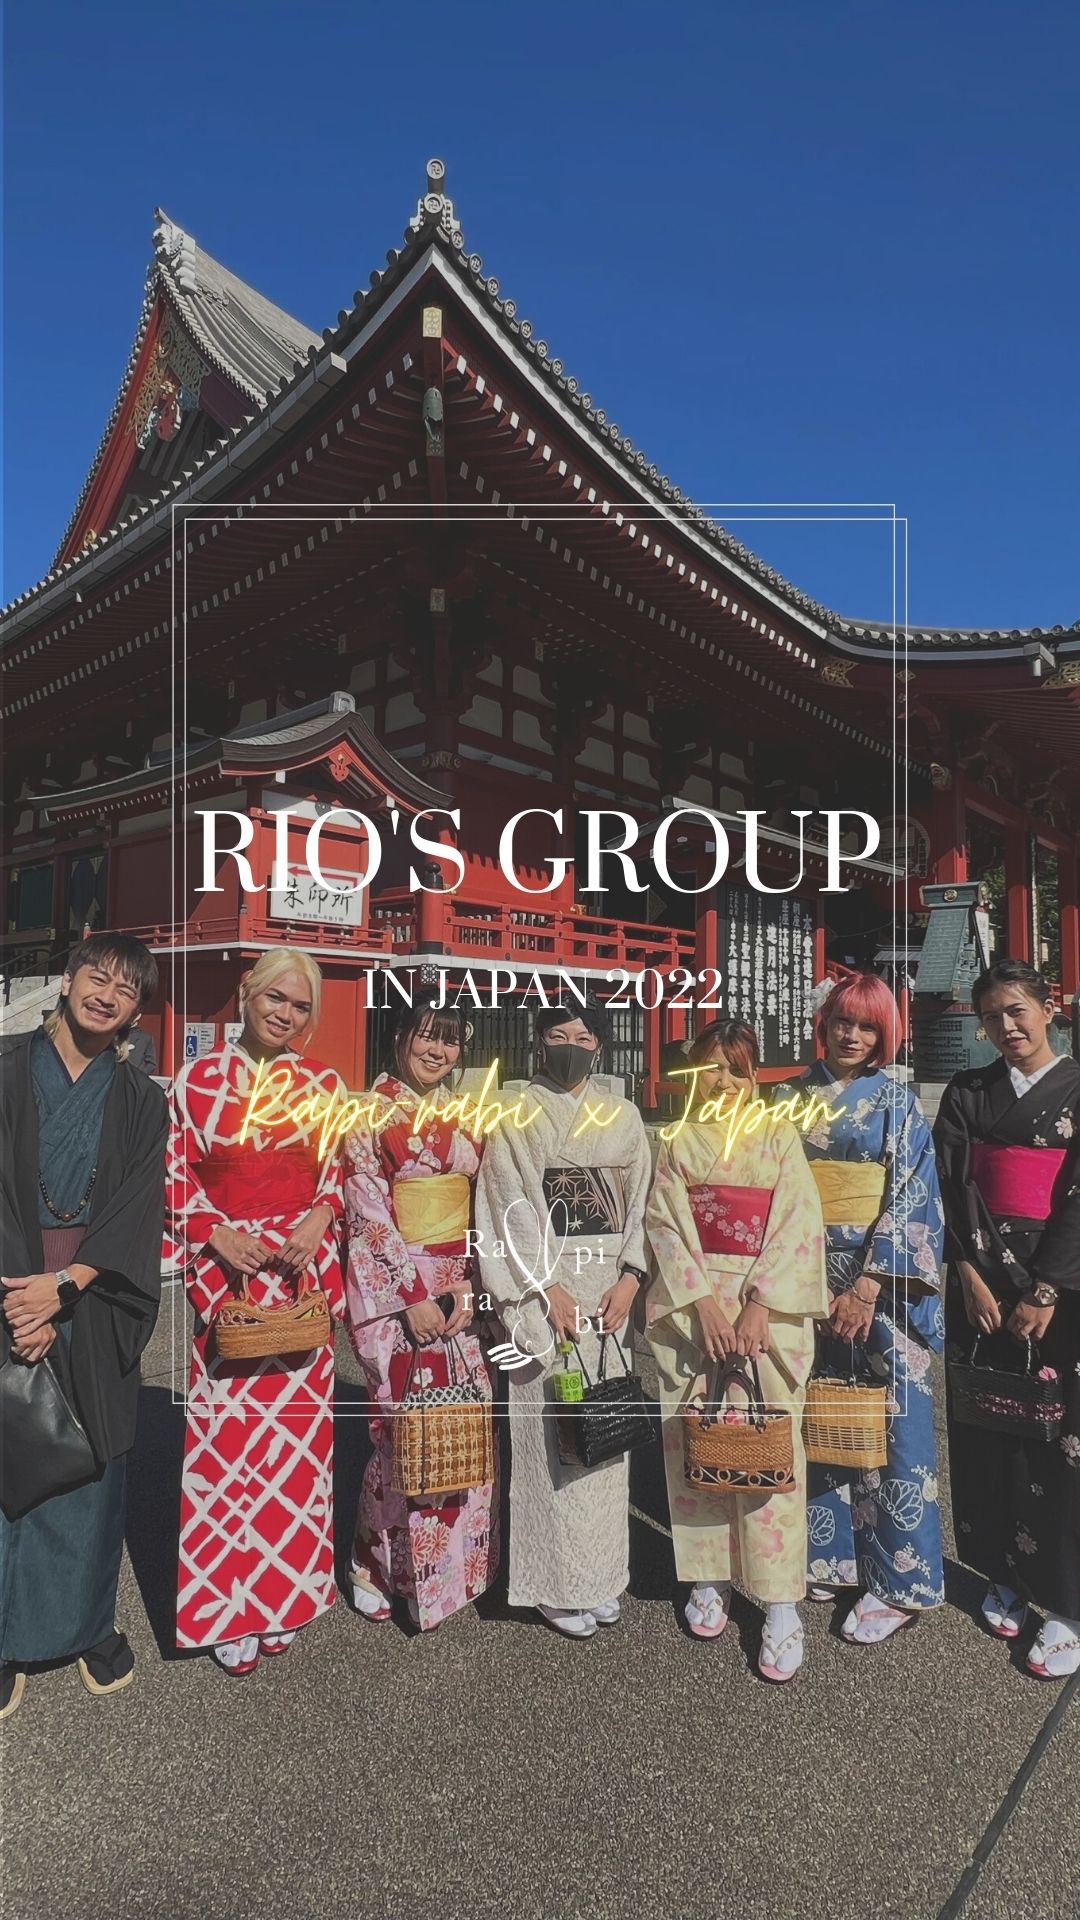 (TH) Rio's group in Japan✈️🌸  By Rapi-rabi